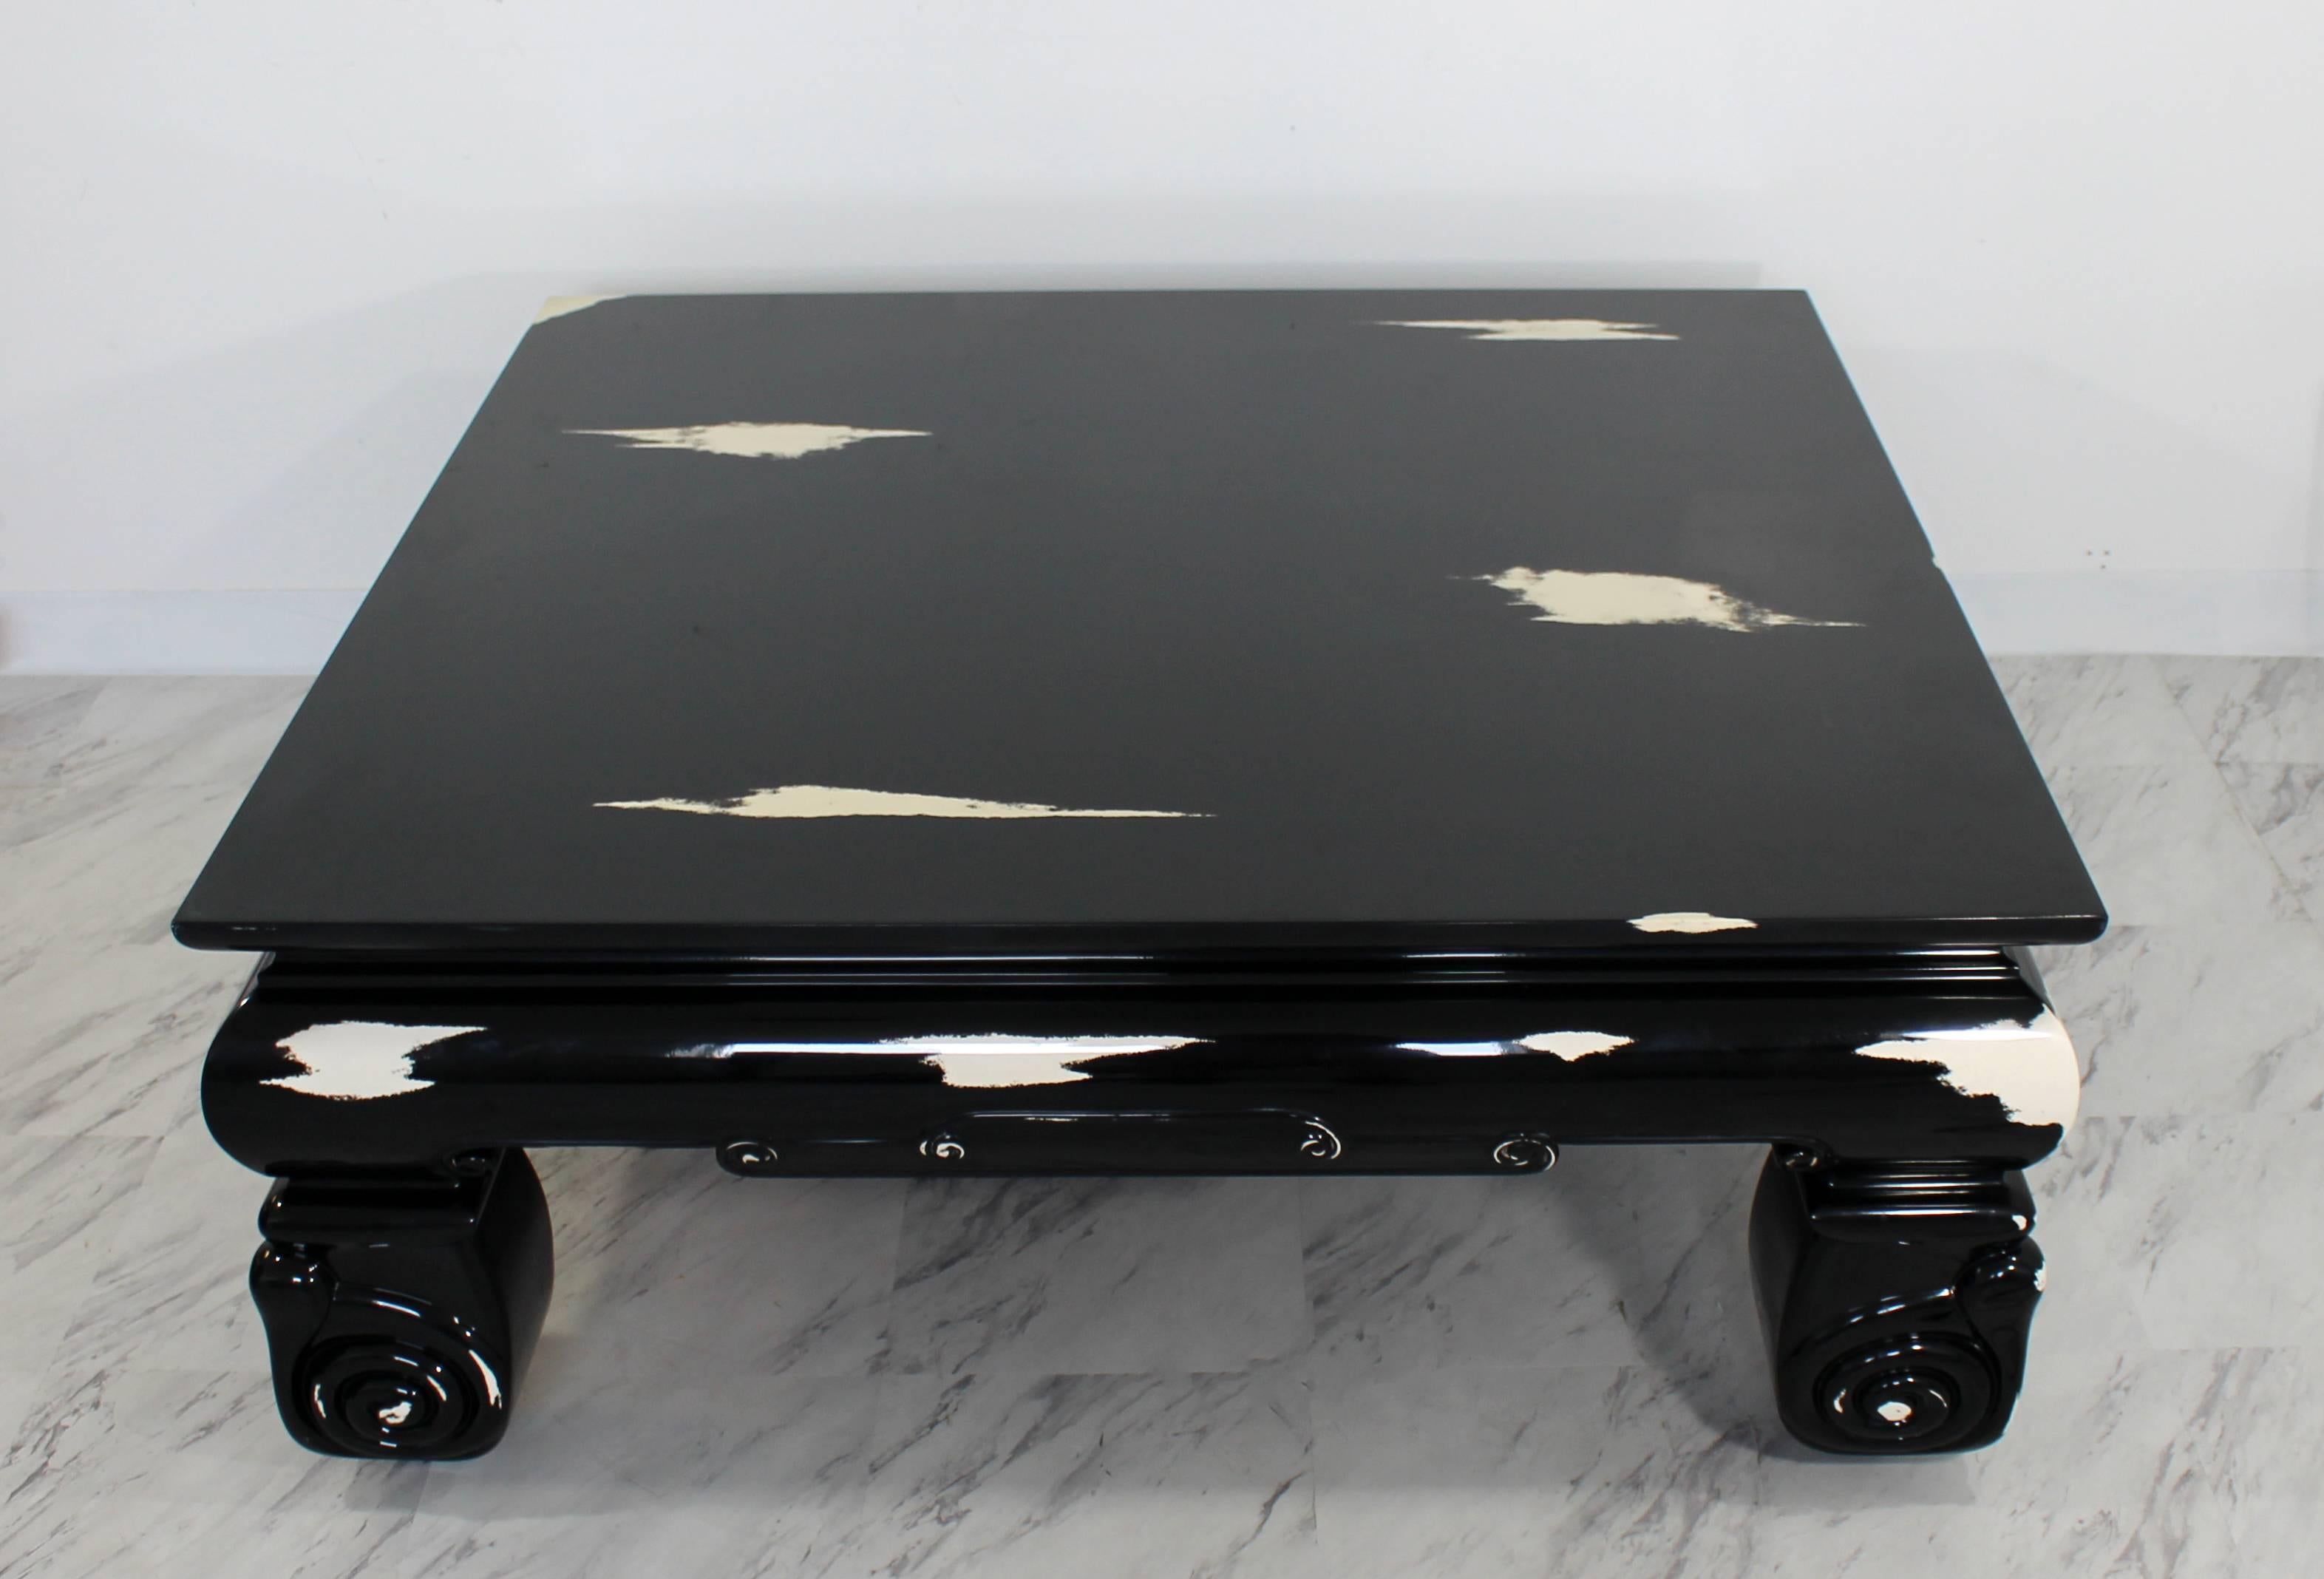 For your consideration is an oversized, square coffee table, with a black lacquer, palomino print, Karl Springer style. In excellent condition. The dimensions are 46" Sq x 18.5" H.